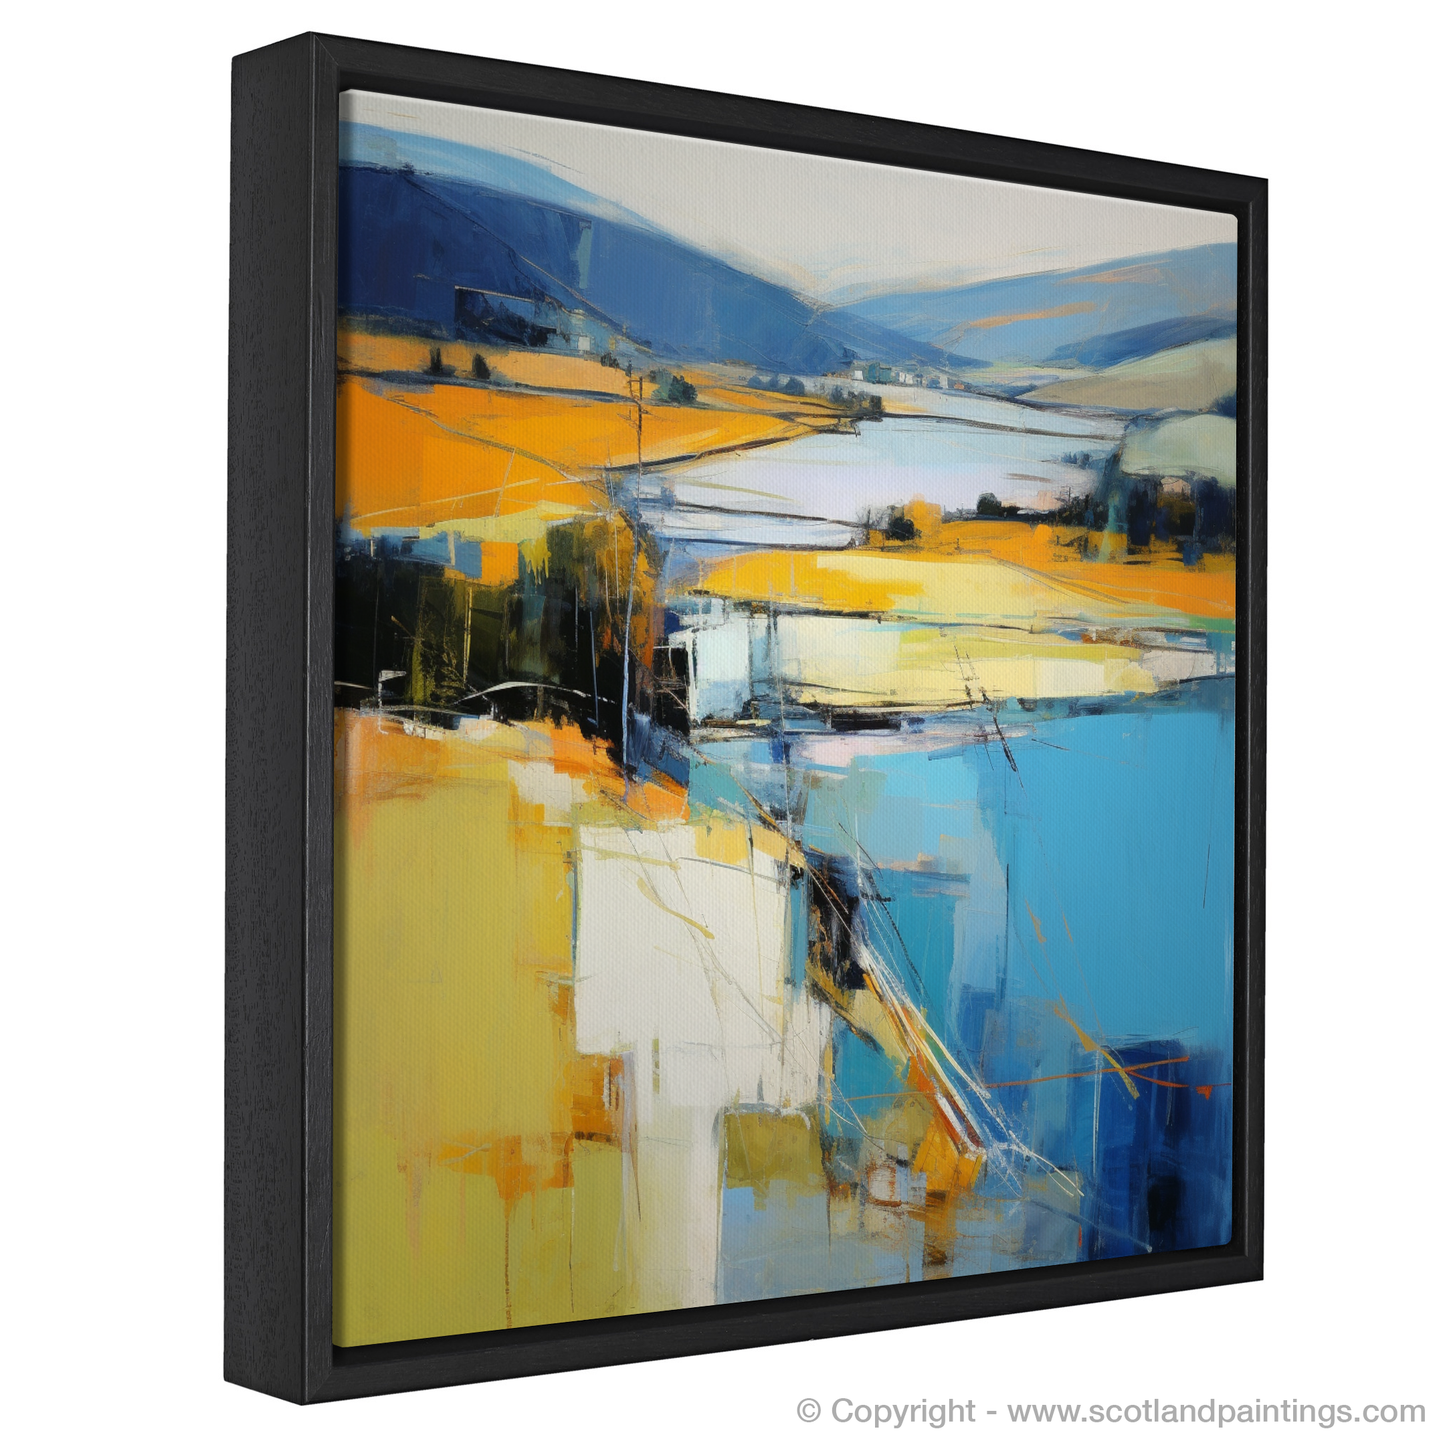 Whispers of Loch Earn - An Abstract Impressionist Journey